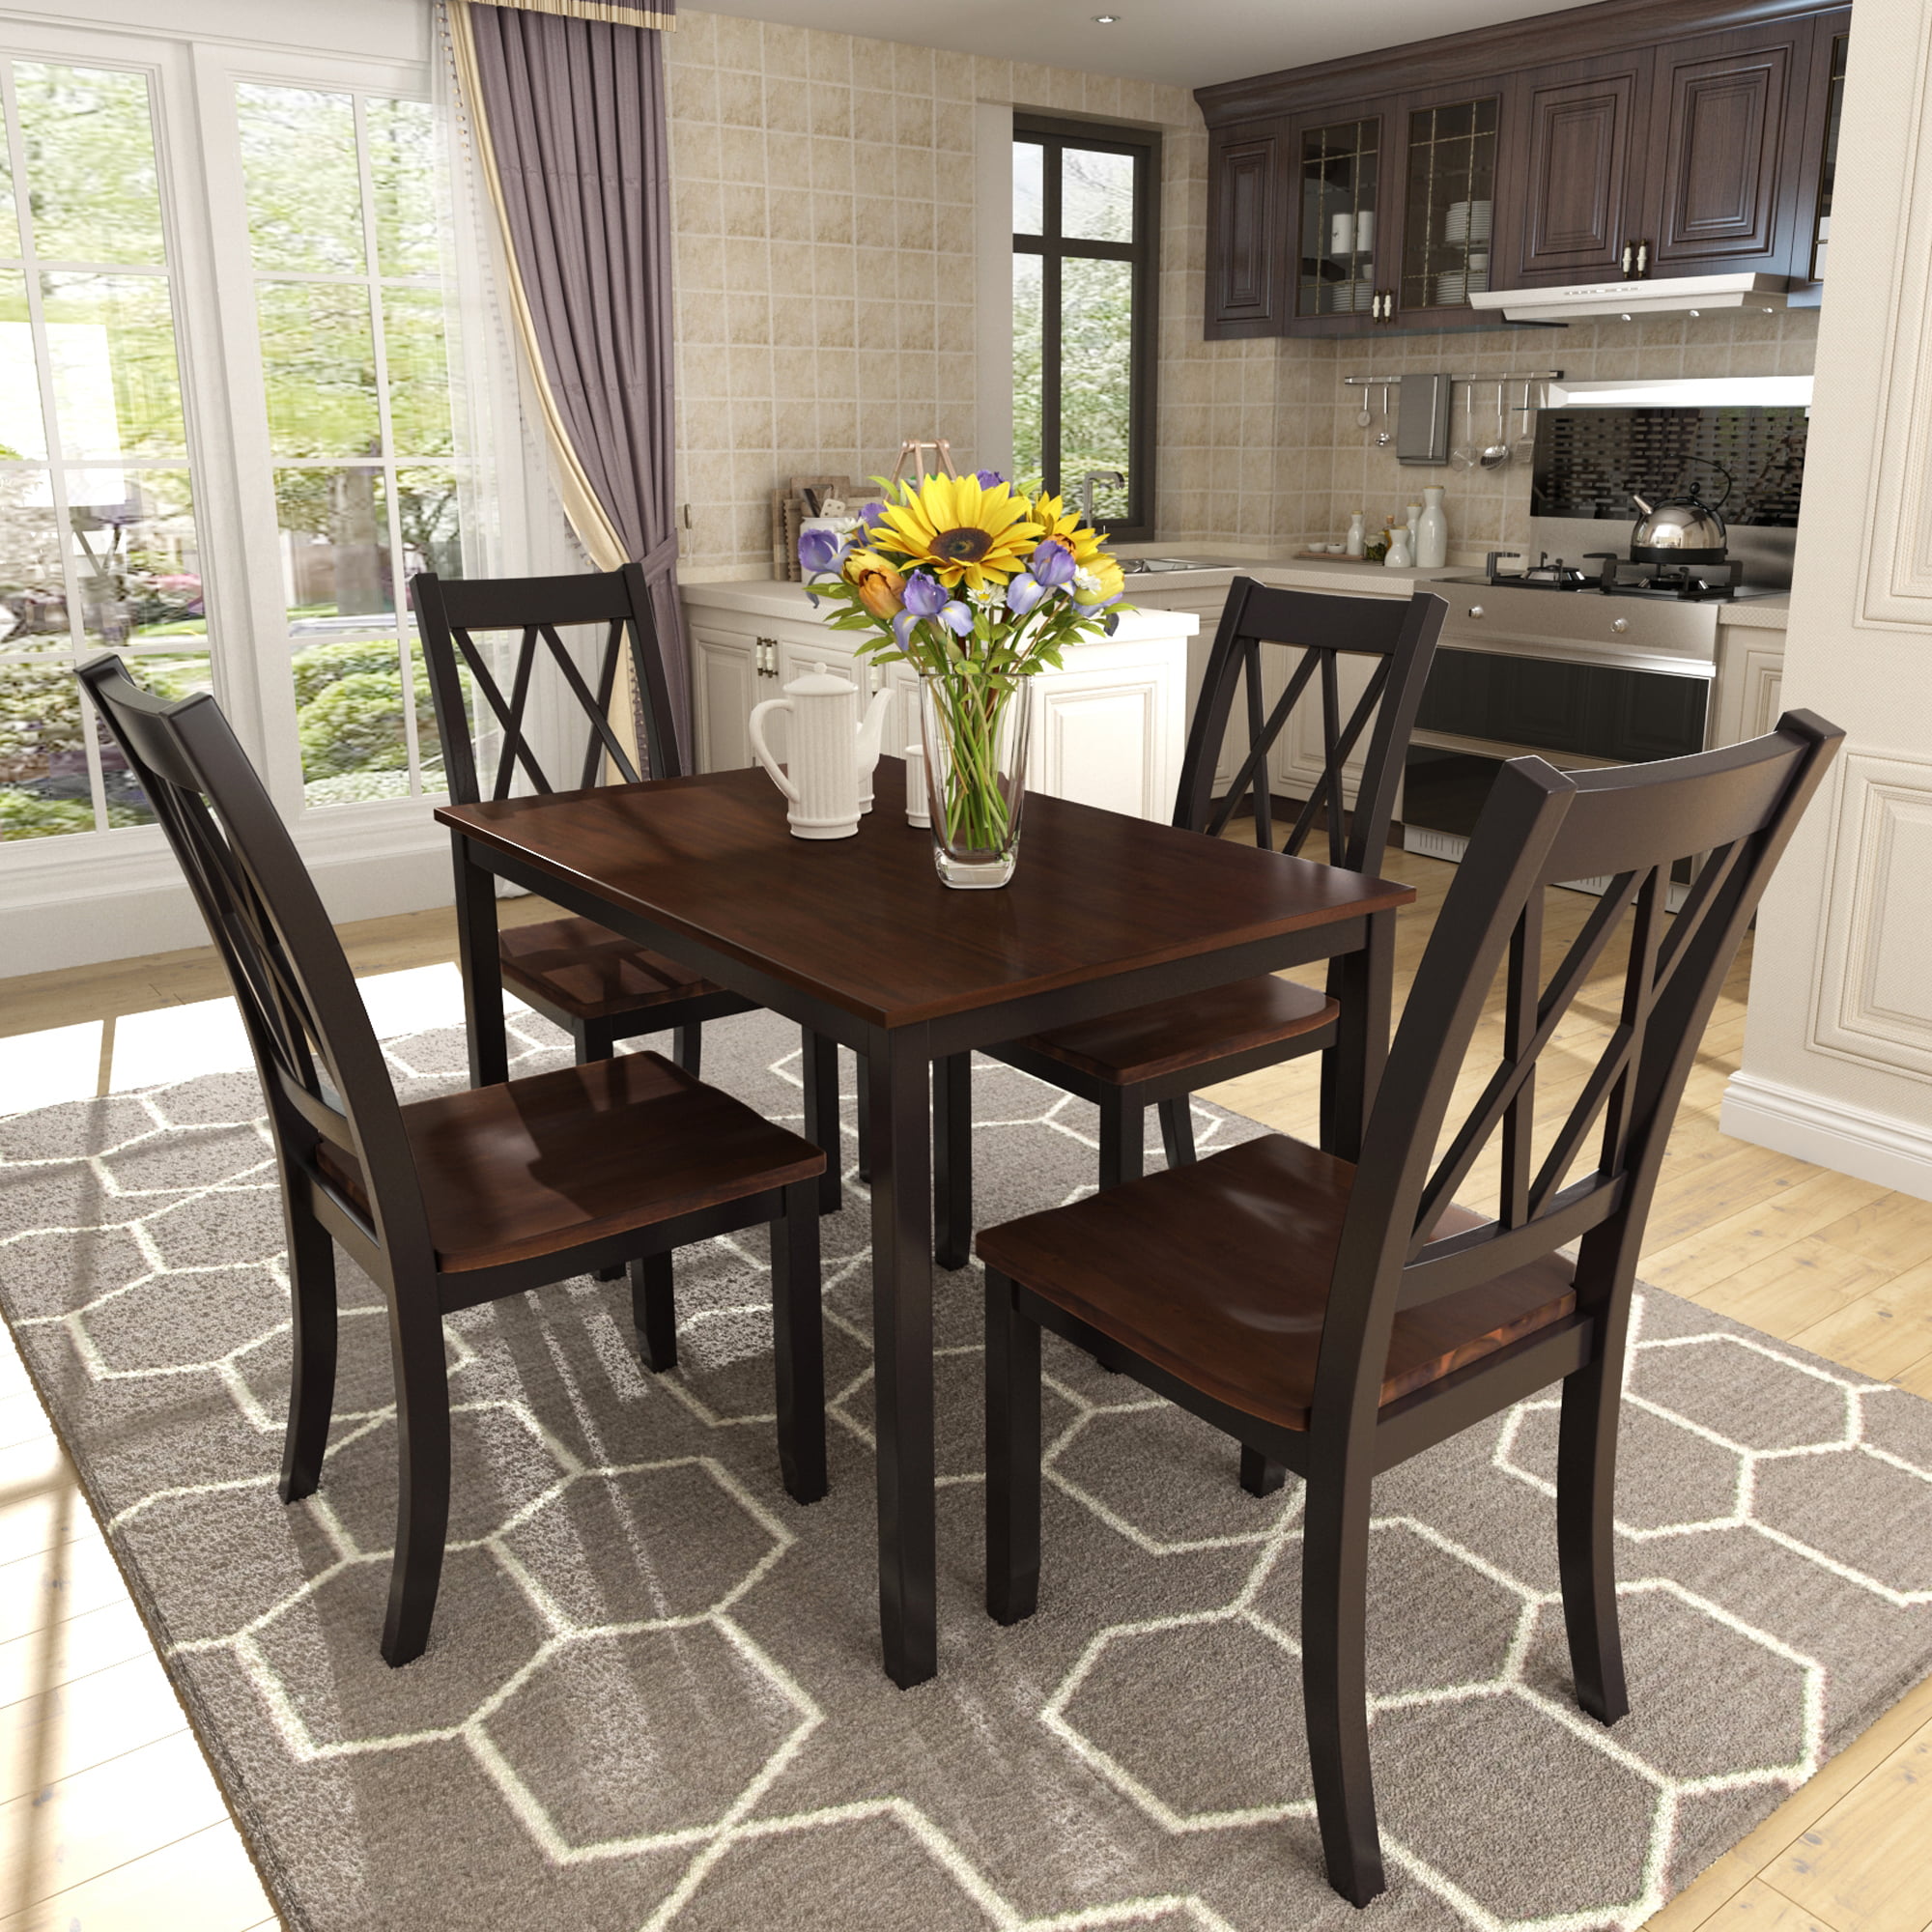 Wooden Kitchen Table and Chairs Set, 5 Piece Square Dining Table Set